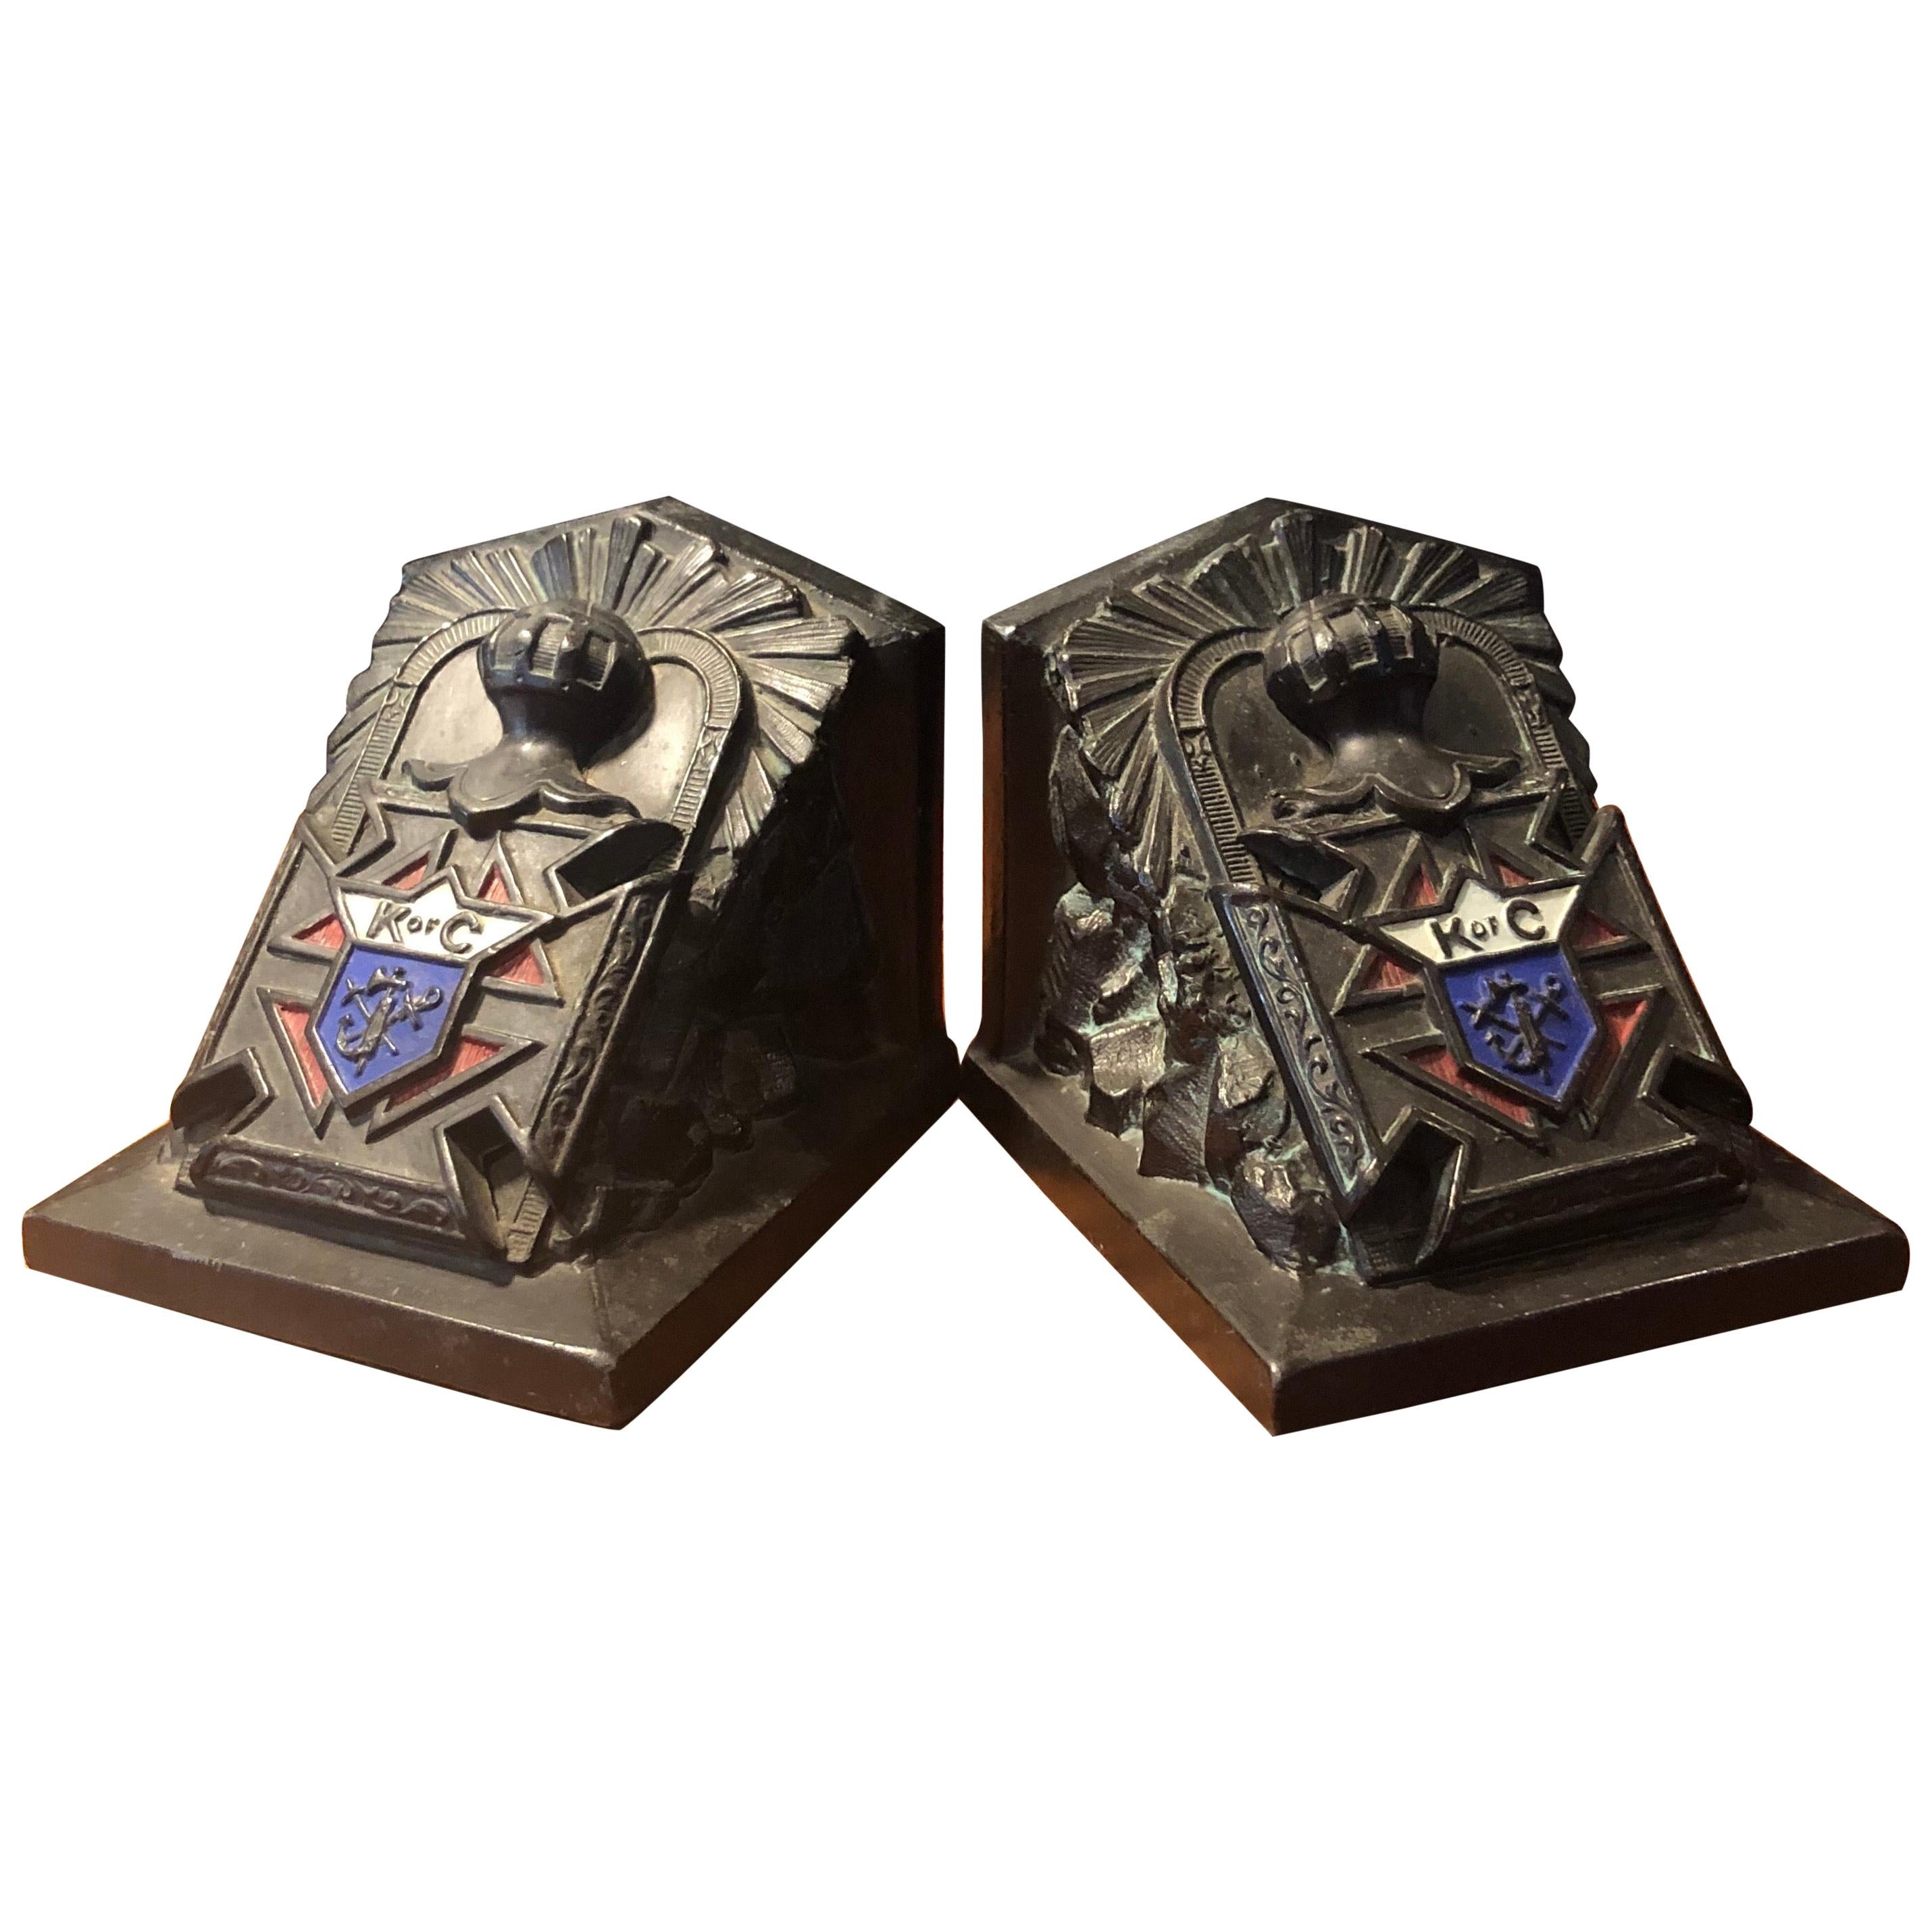 Pair of Antique Art Deco Knights of Columbus Bookends by Ronson Art Metal Works